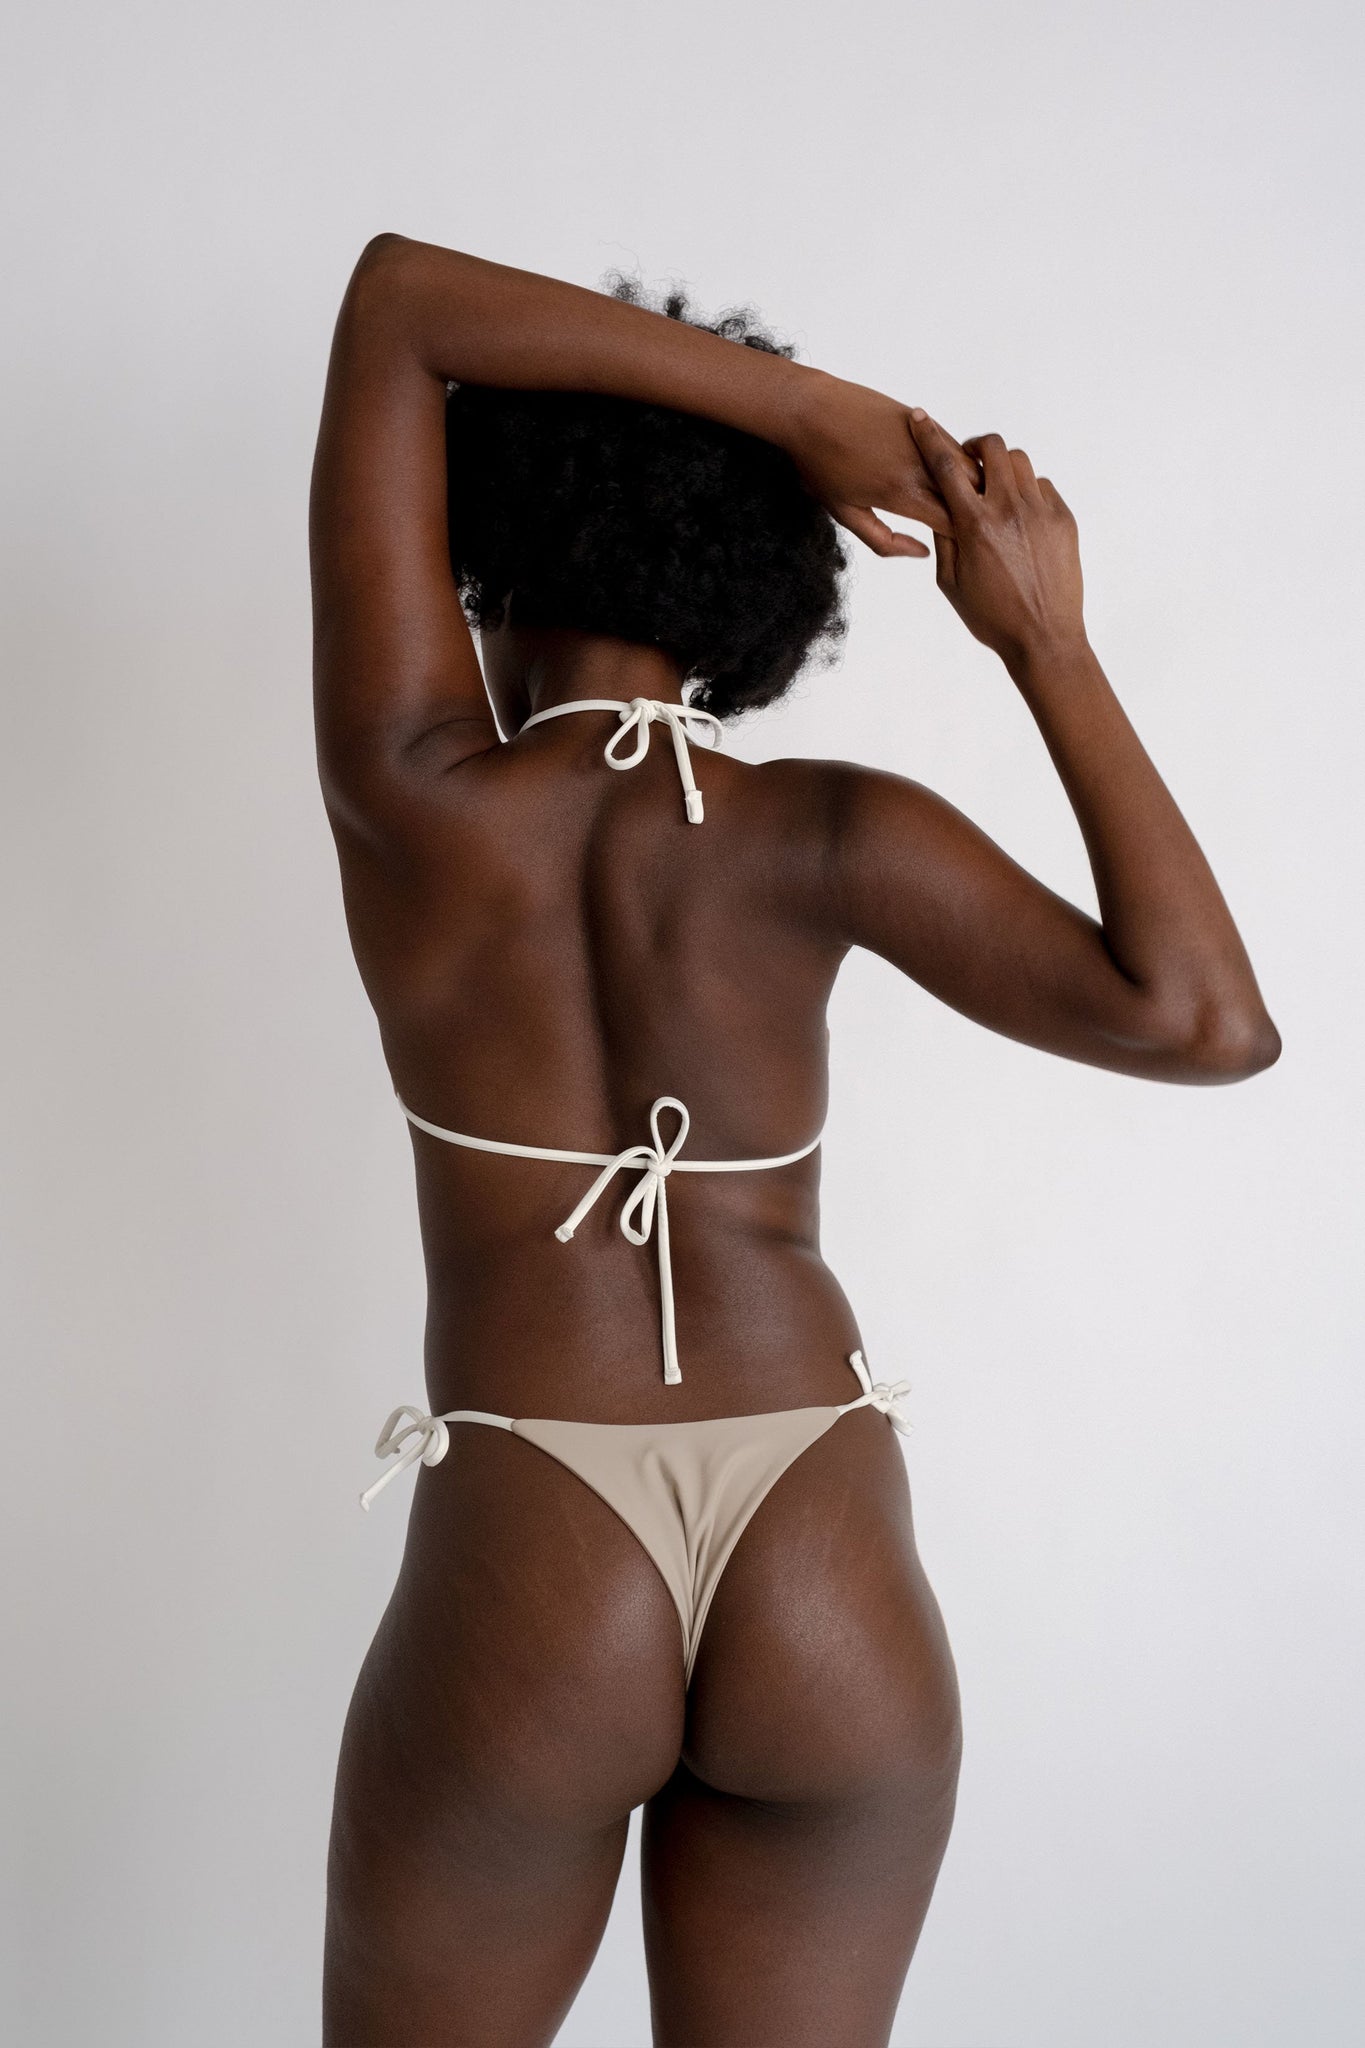 The back of a woman with her arms folded wearing nude bikini bottoms with white adjustable strings and a matching nude triangle bikini top with white adjustable strings.